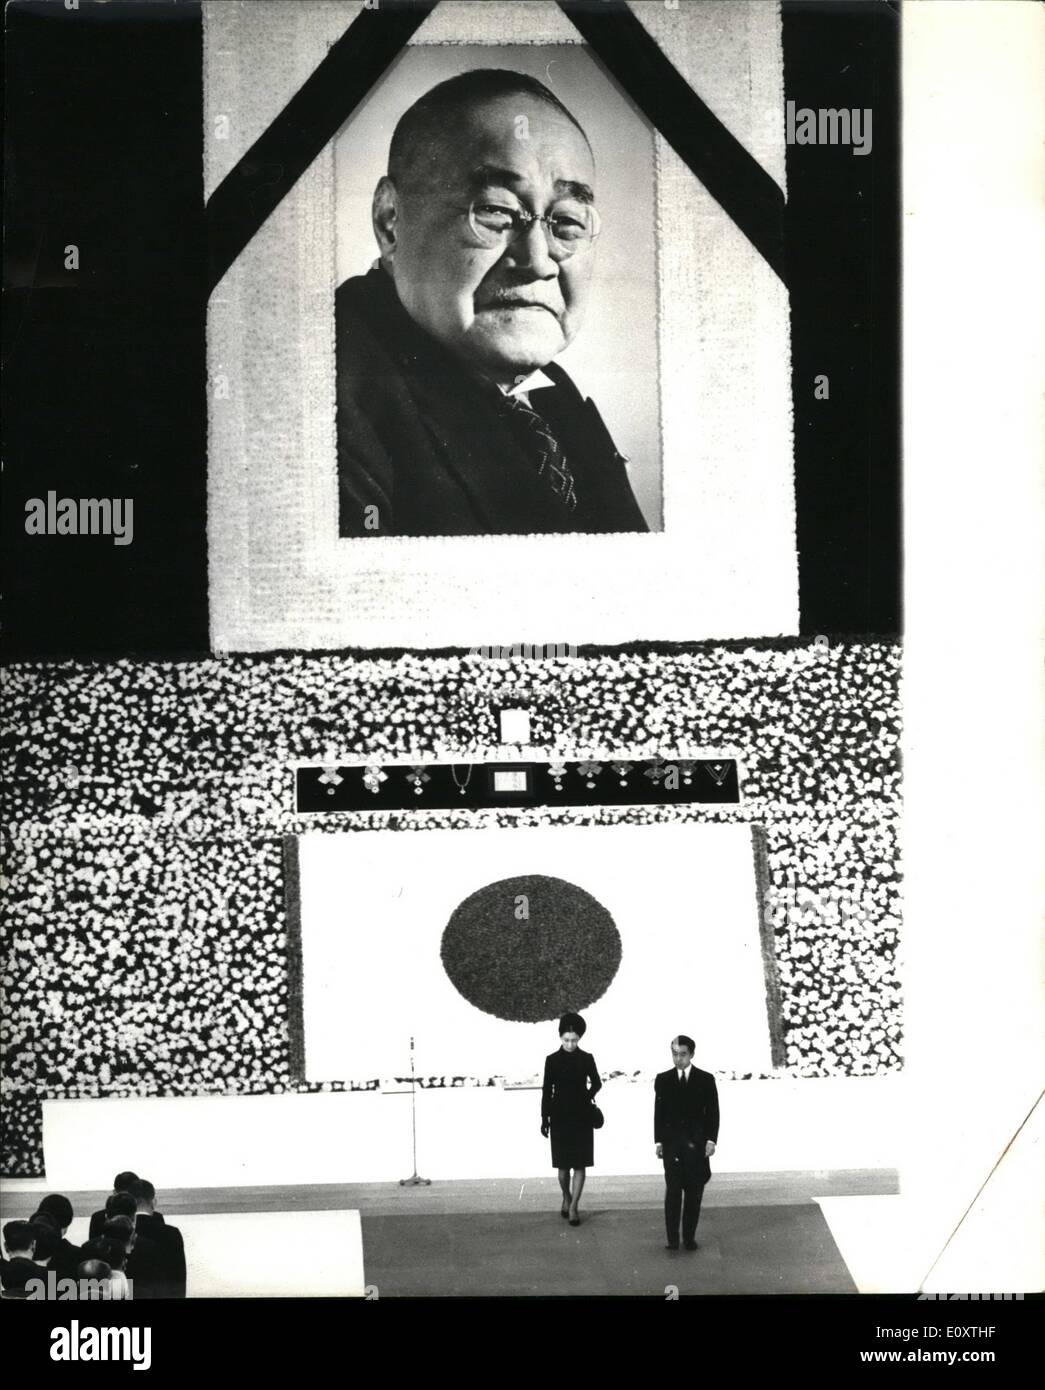 Nov. 11, 1967 - State funeral for former Japanese premier. The state funeral for the late former Prime Minister of Japan, Shigaru Yoshida, took place at Nippon Budokan Hall in Tokyo. This was the first state funeral under the new Constitution . Prime Minister Eisaku sato acted as chairman of thefuneral committee. Mr Stock Photo